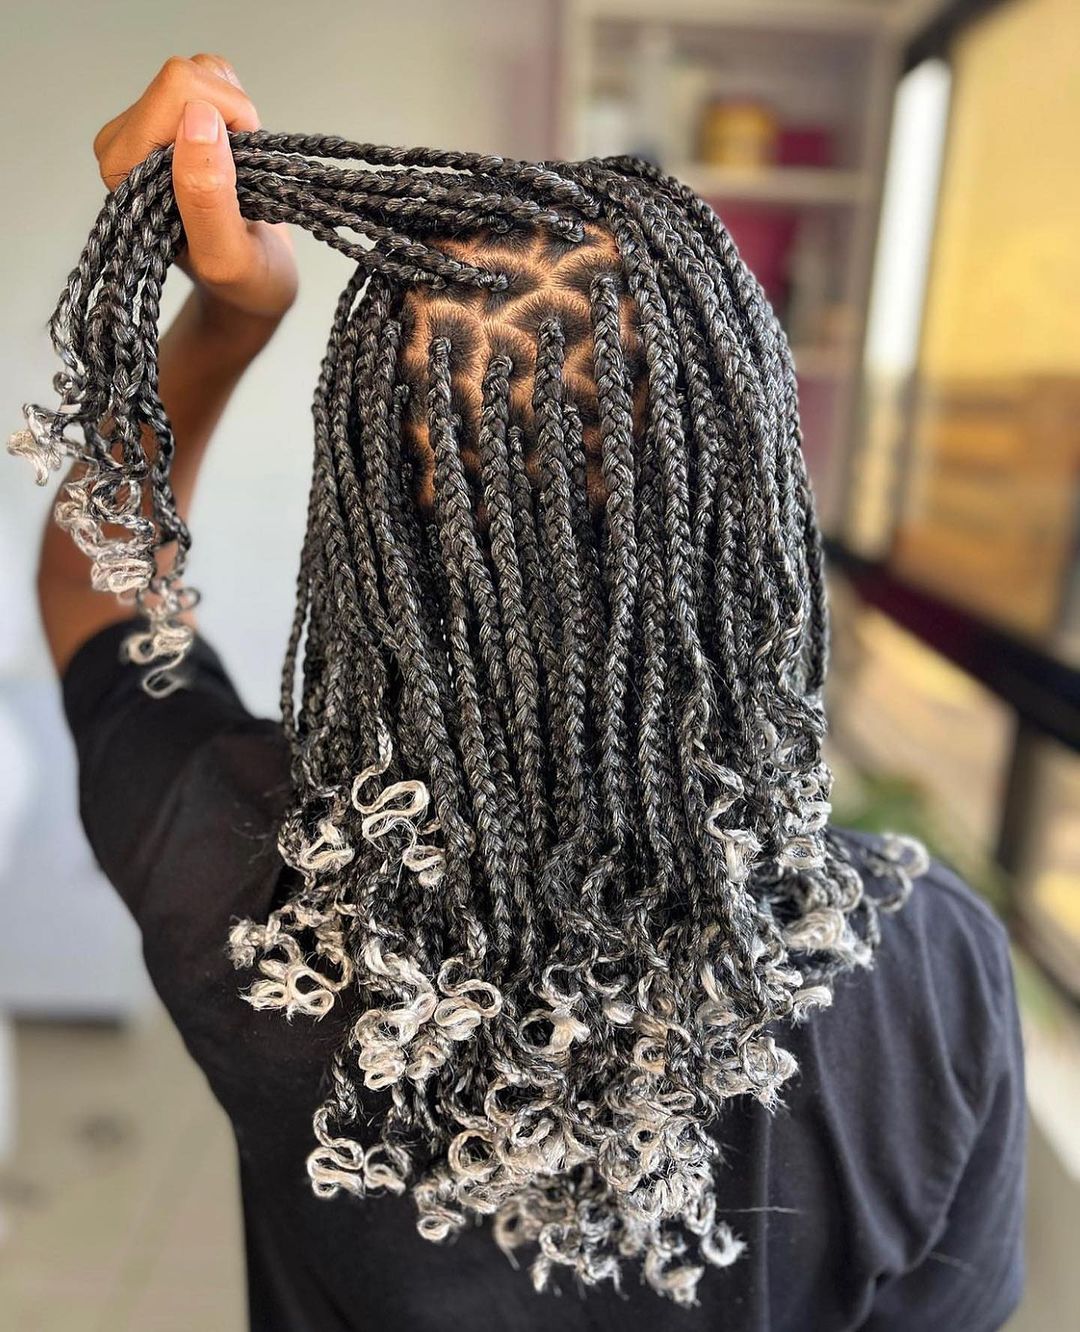 14. White and Black Mix Bohemian Knotless Braids With Curly Ends